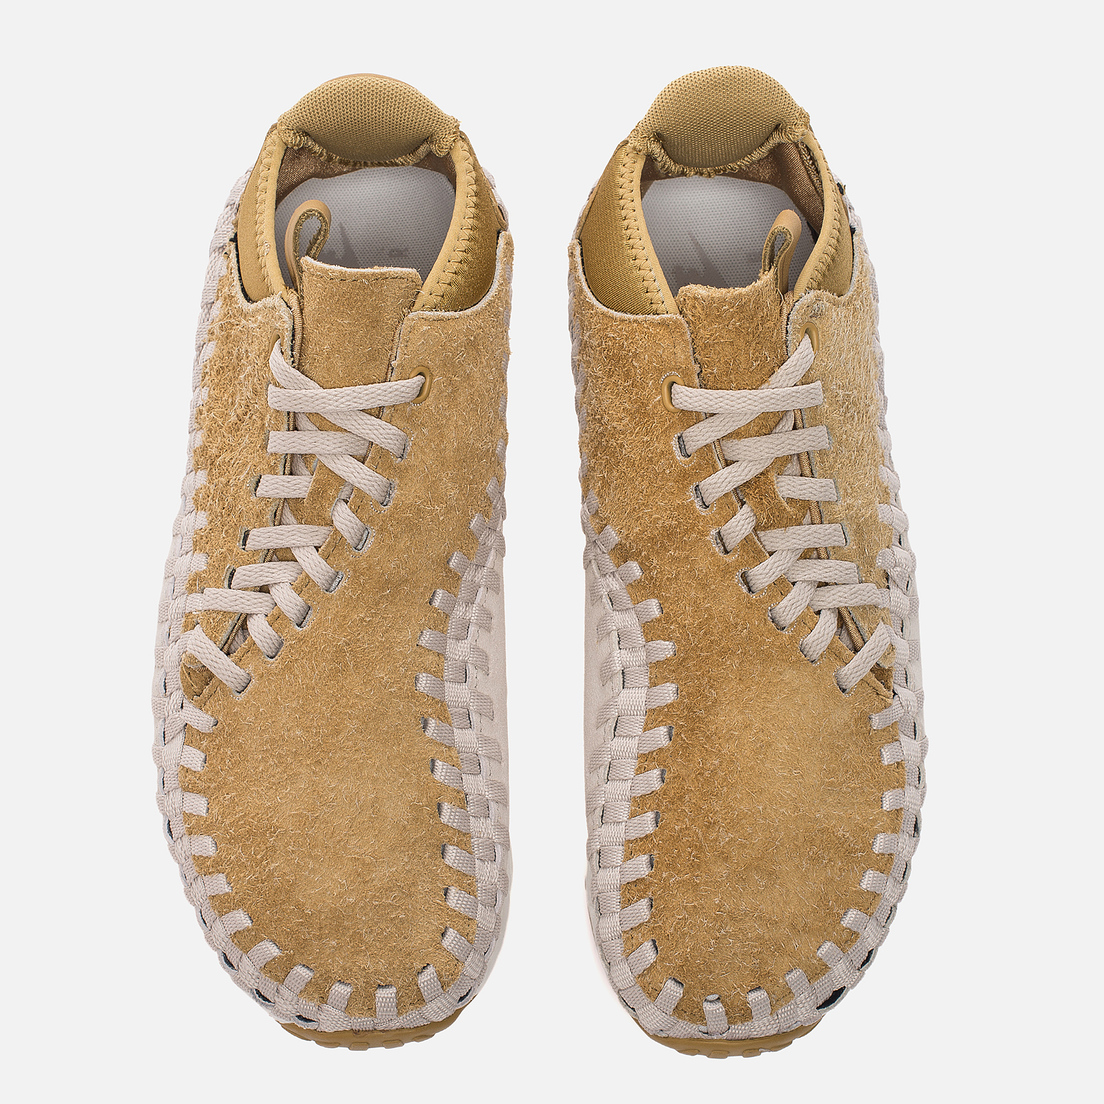 Nike Мужские кроссовки Air Footscape Woven Chukka QS Hairy Suede Pack